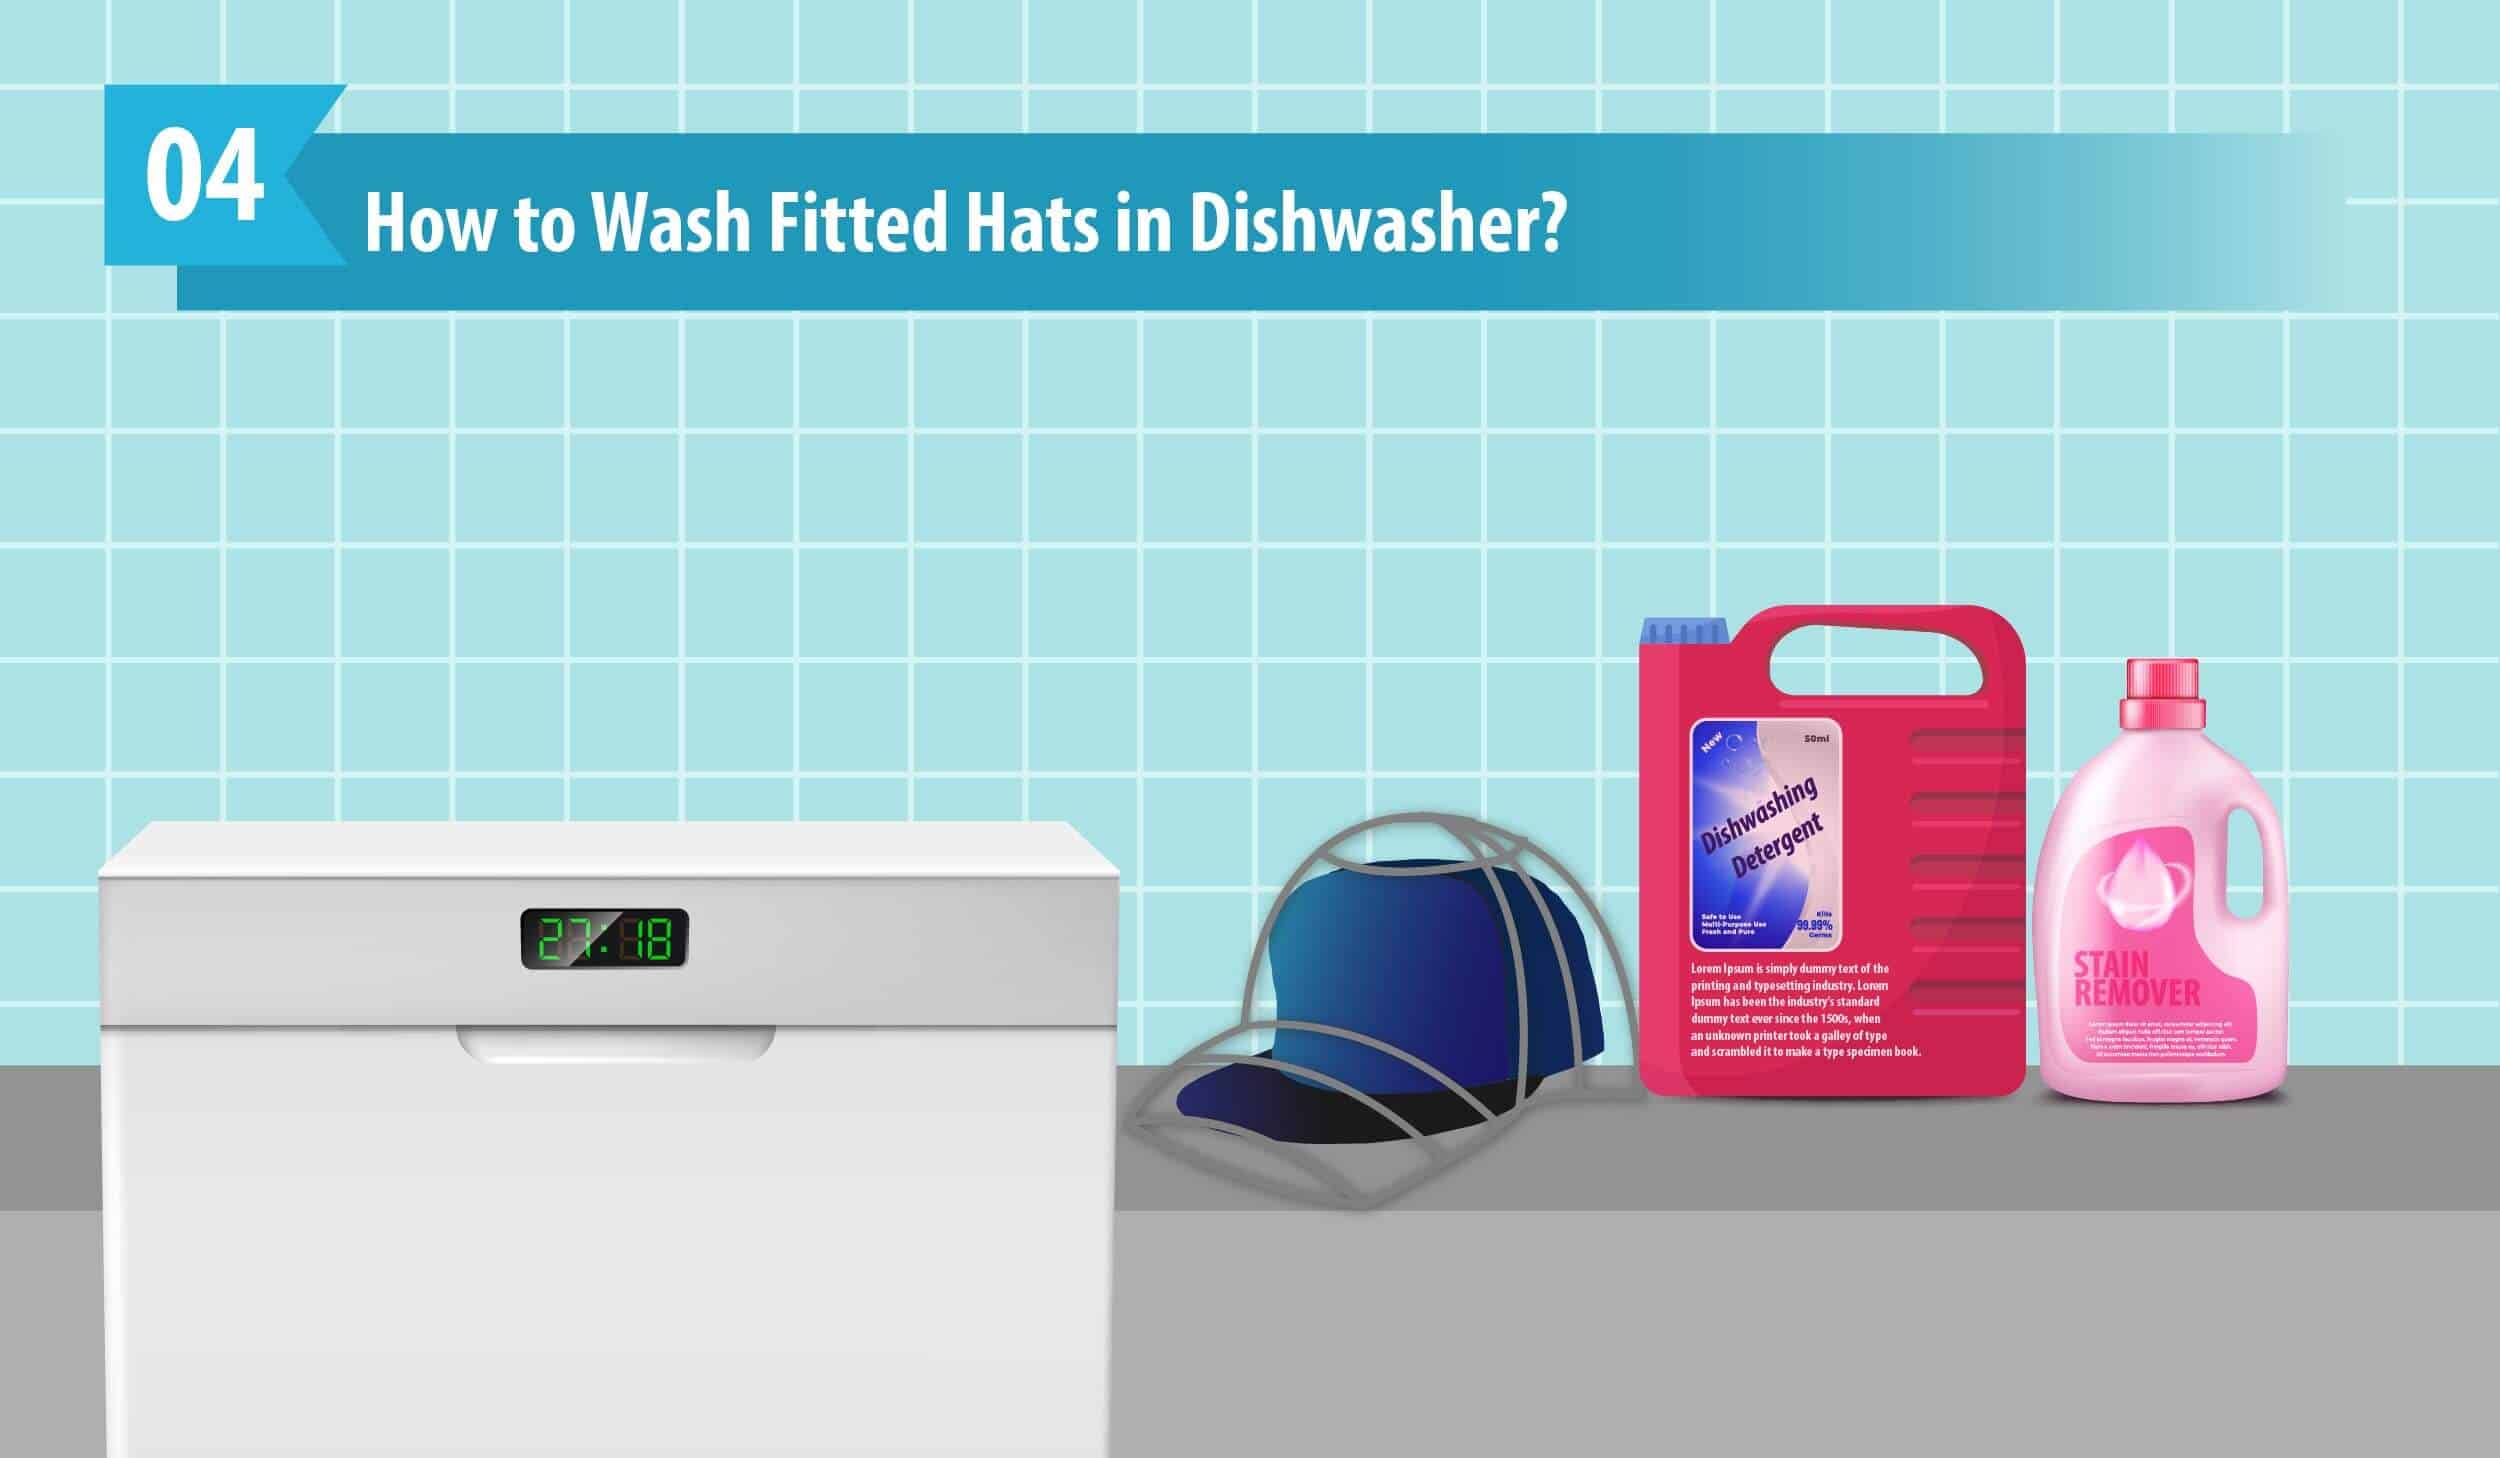 How to Wash Fitted Hats in Dishwasher